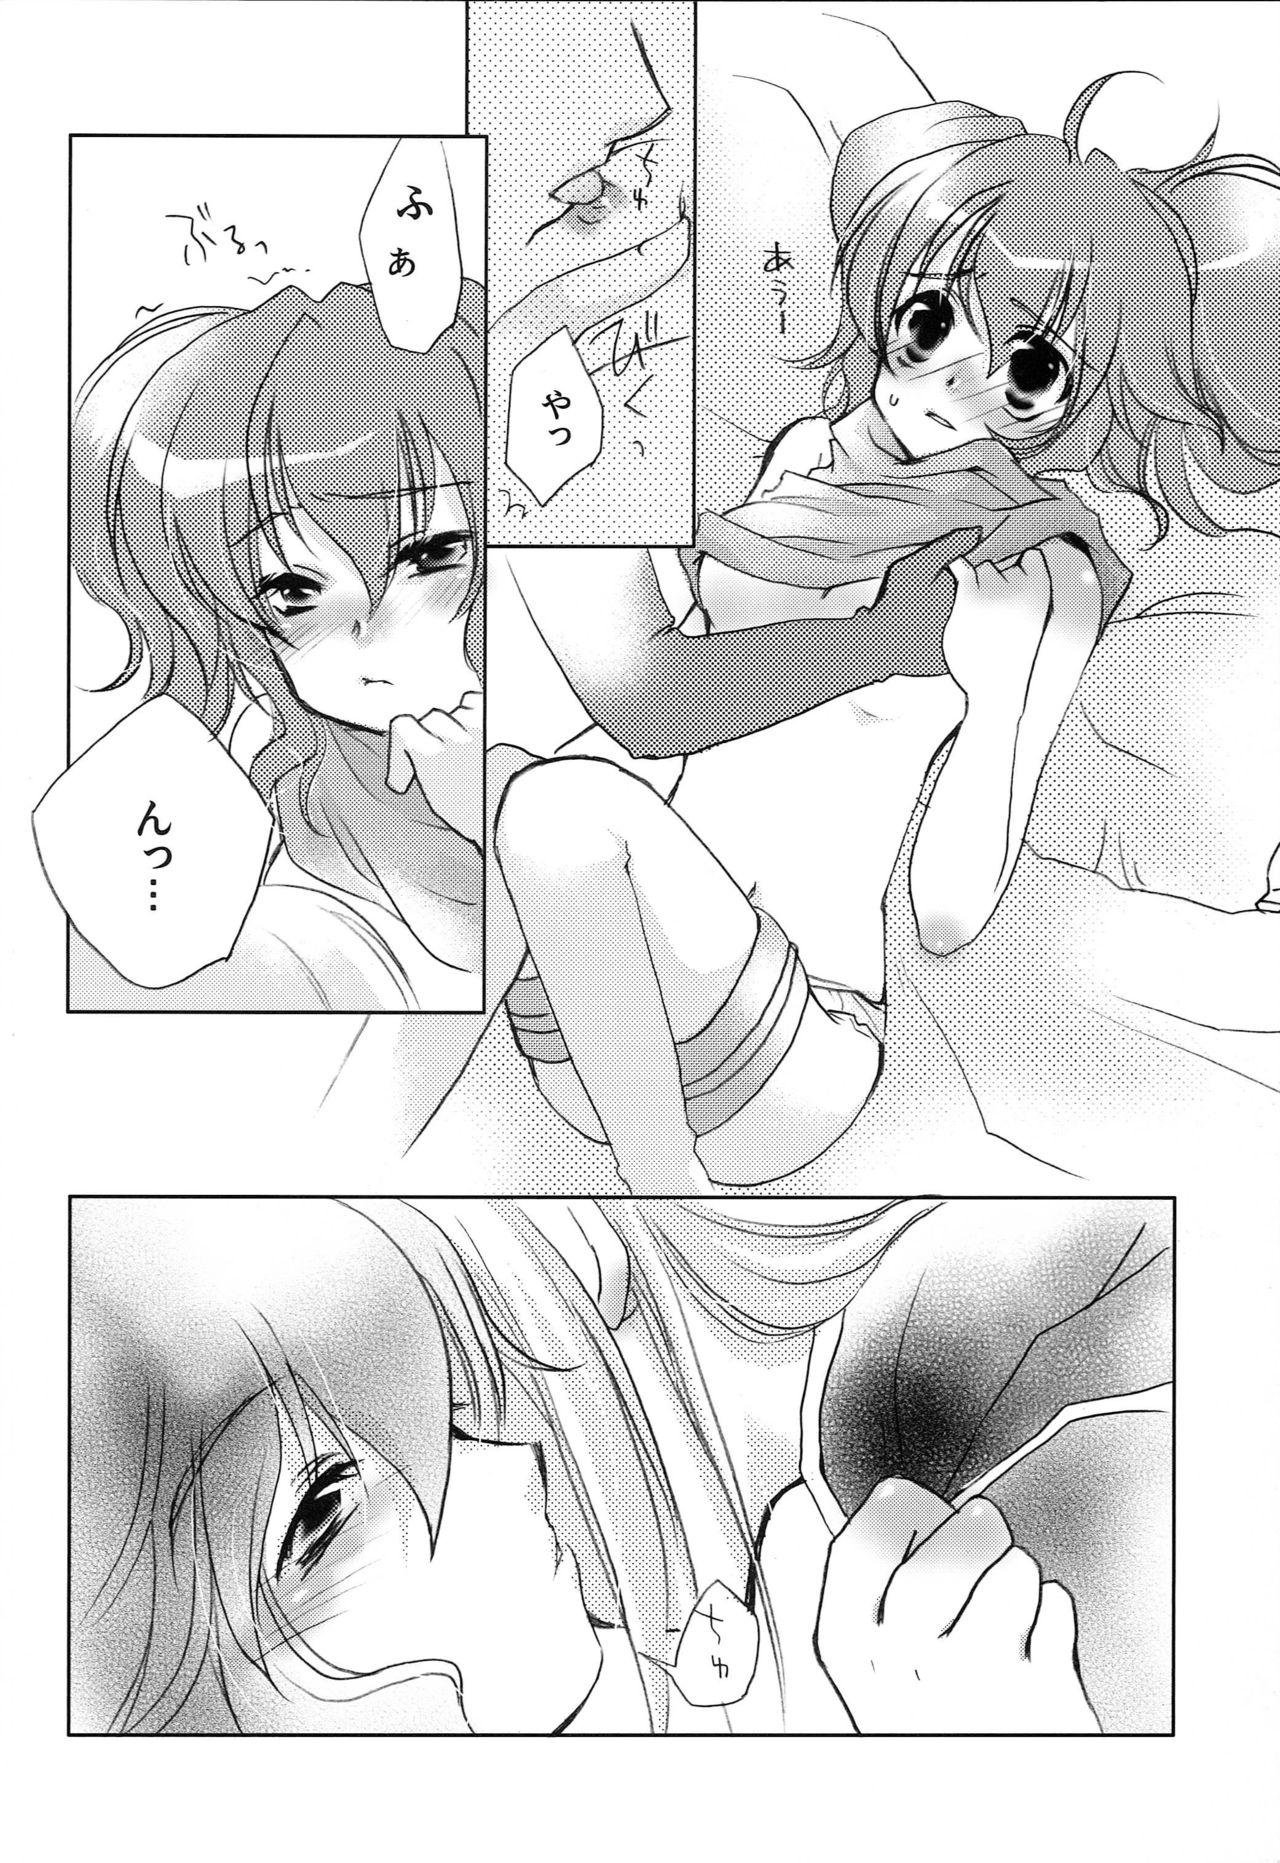 Pregnant Carnation, Lily, Lily, Rose - Tales of the abyss Daring - Page 9